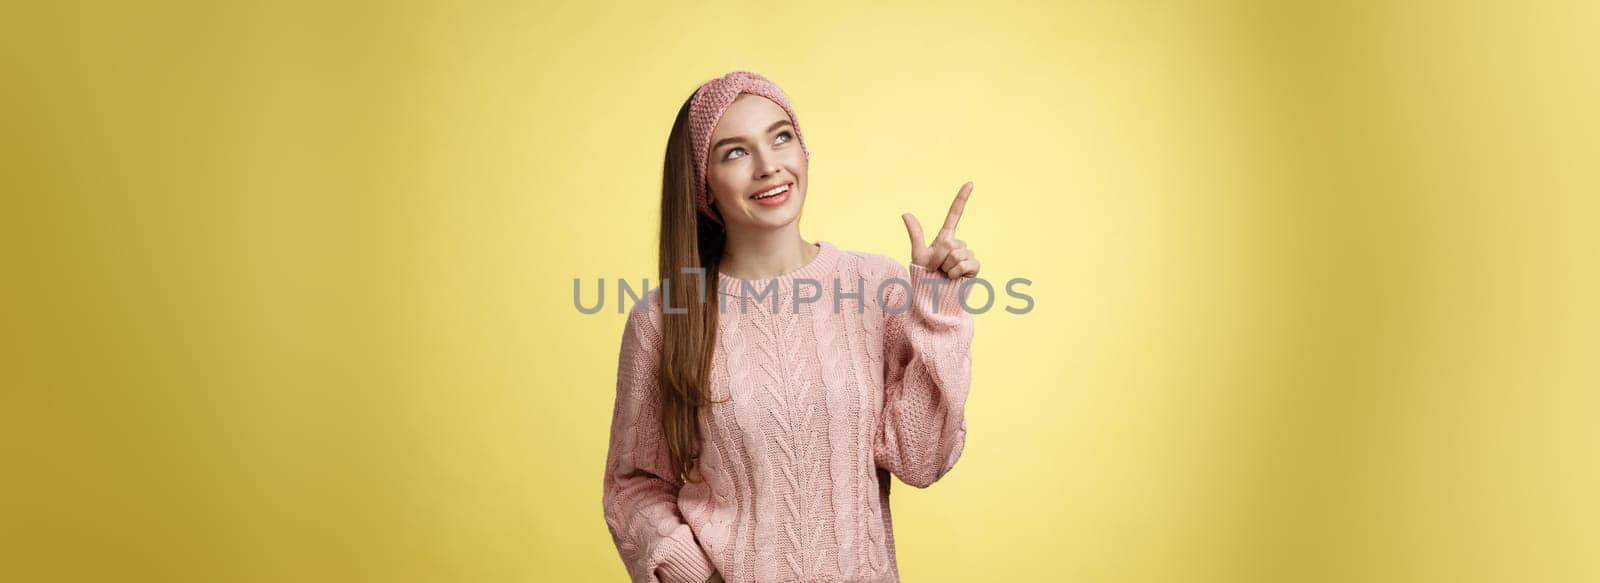 Portrait of amused interested cute 20s european girl wearing sweater, headband looking upper left corner pointing sideways smiling intrigued, ecstatic, captured by curious promo over yellow wall.